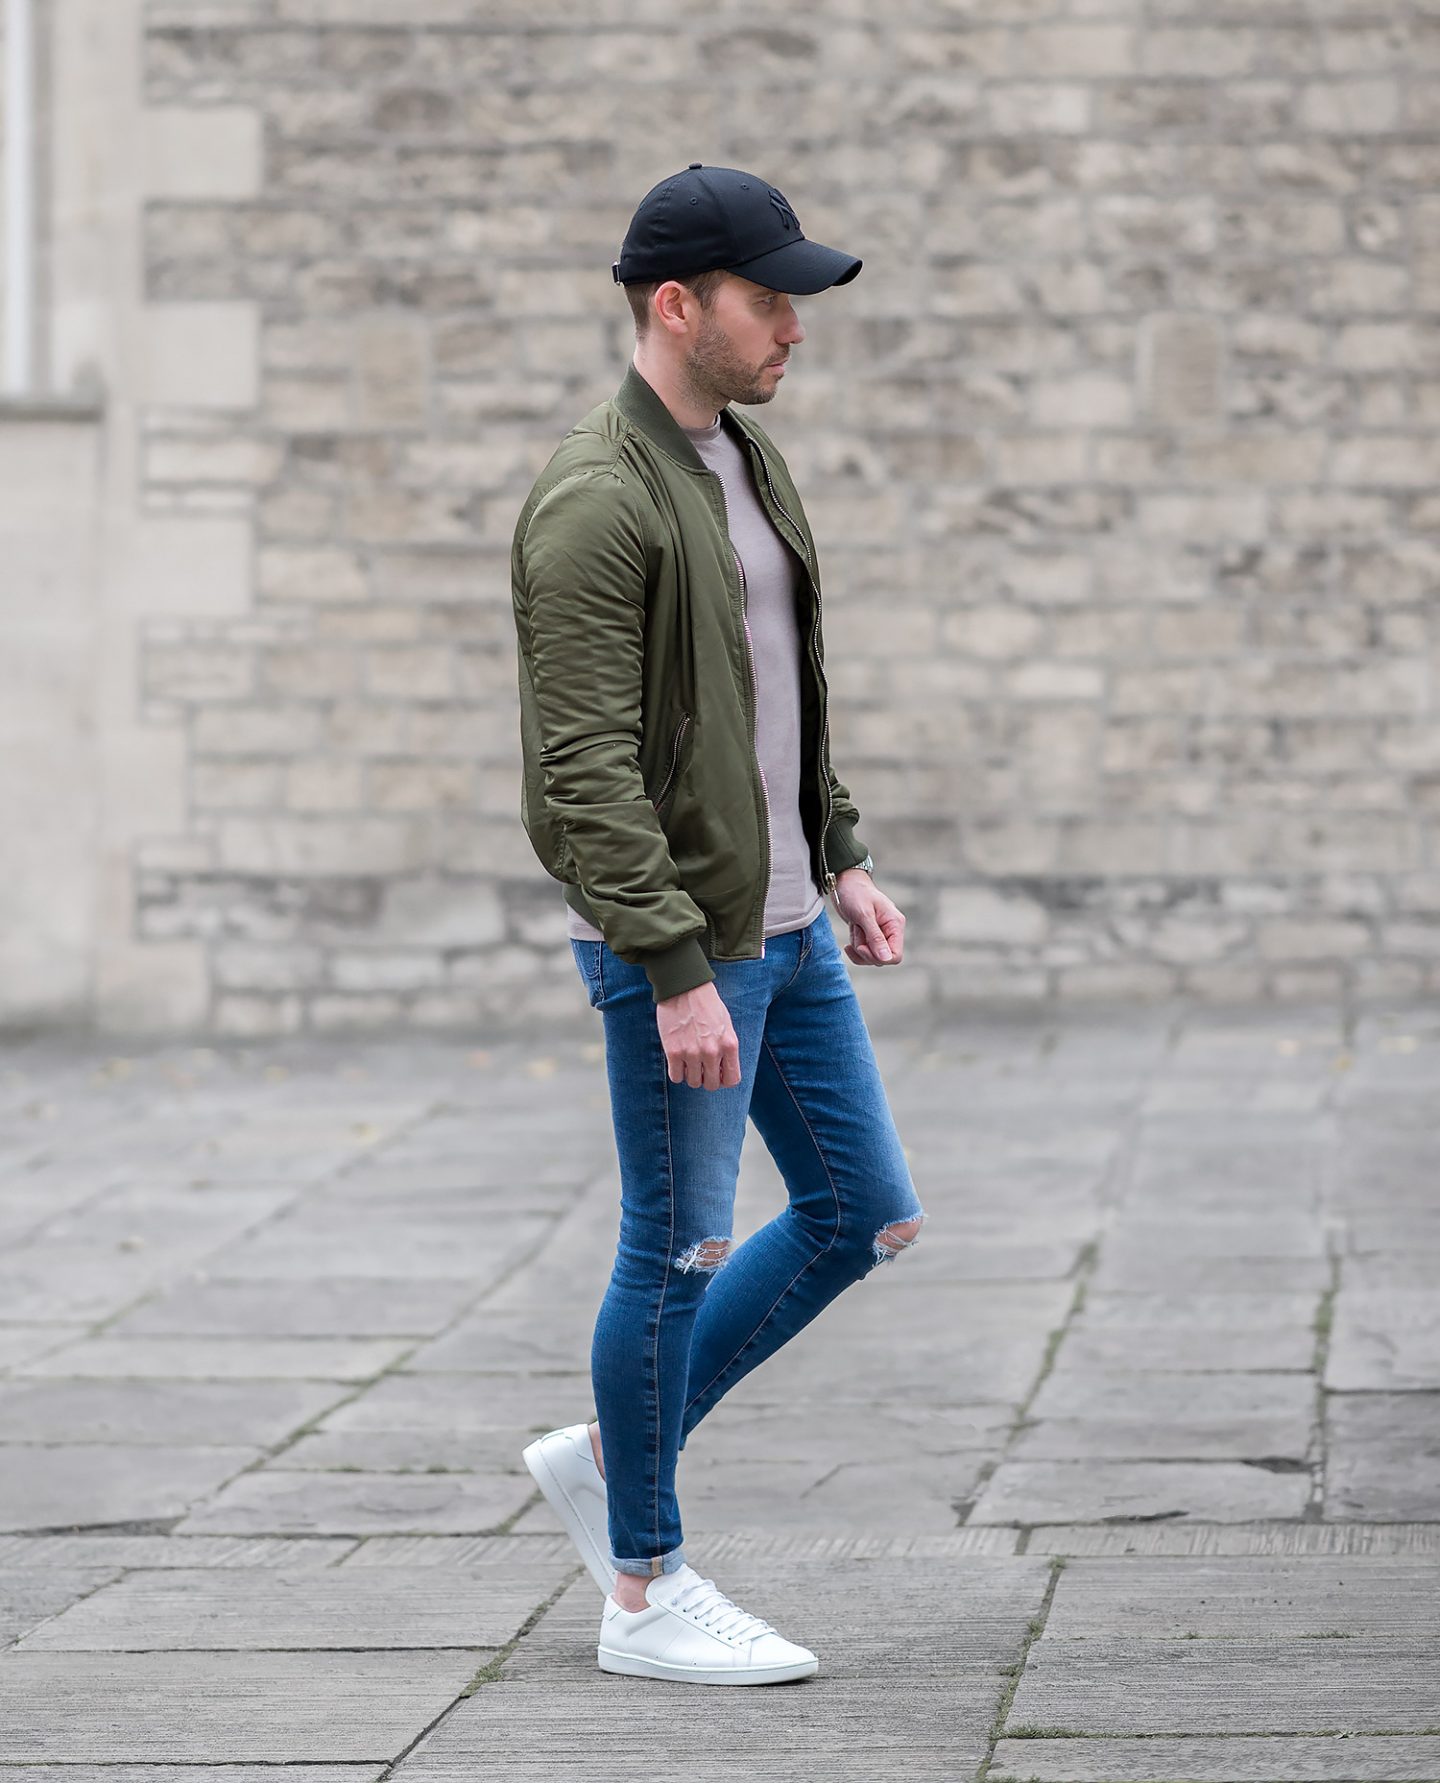 Another Topshop Green Bomber Jacket Outfit - Your Average Guy